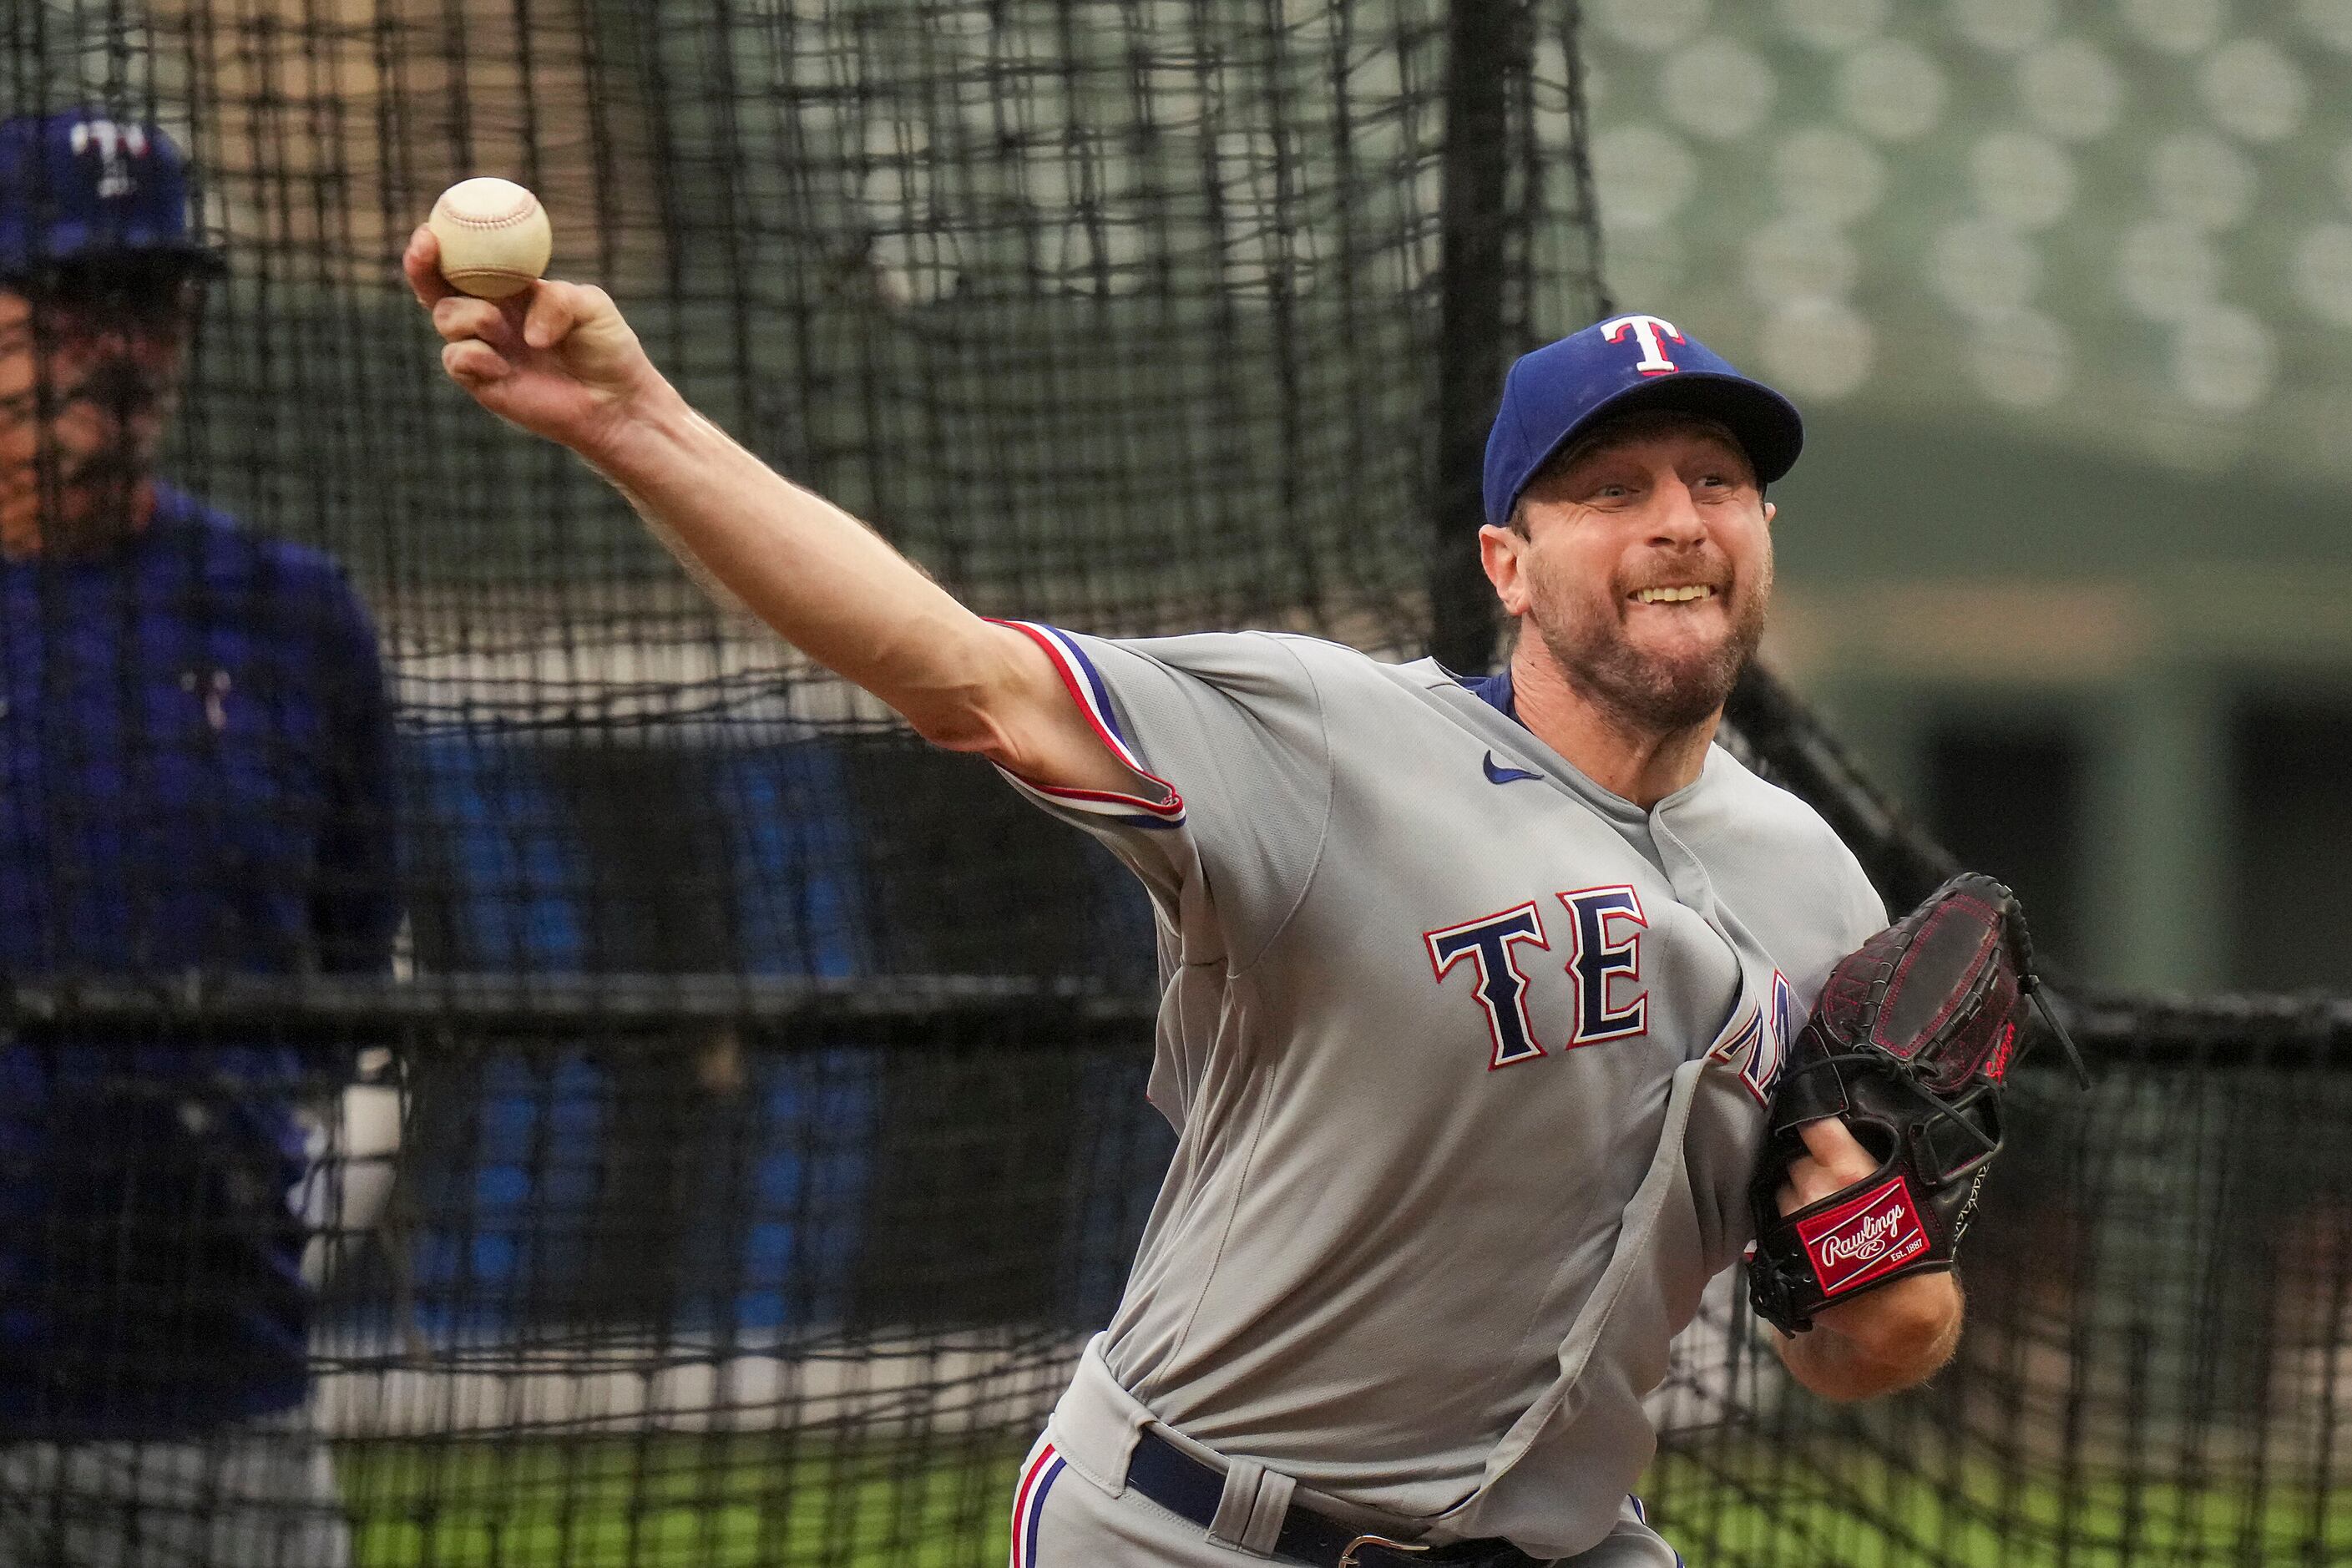 Max Scherzer likely on Rangers' ALCS roster, but how much can he